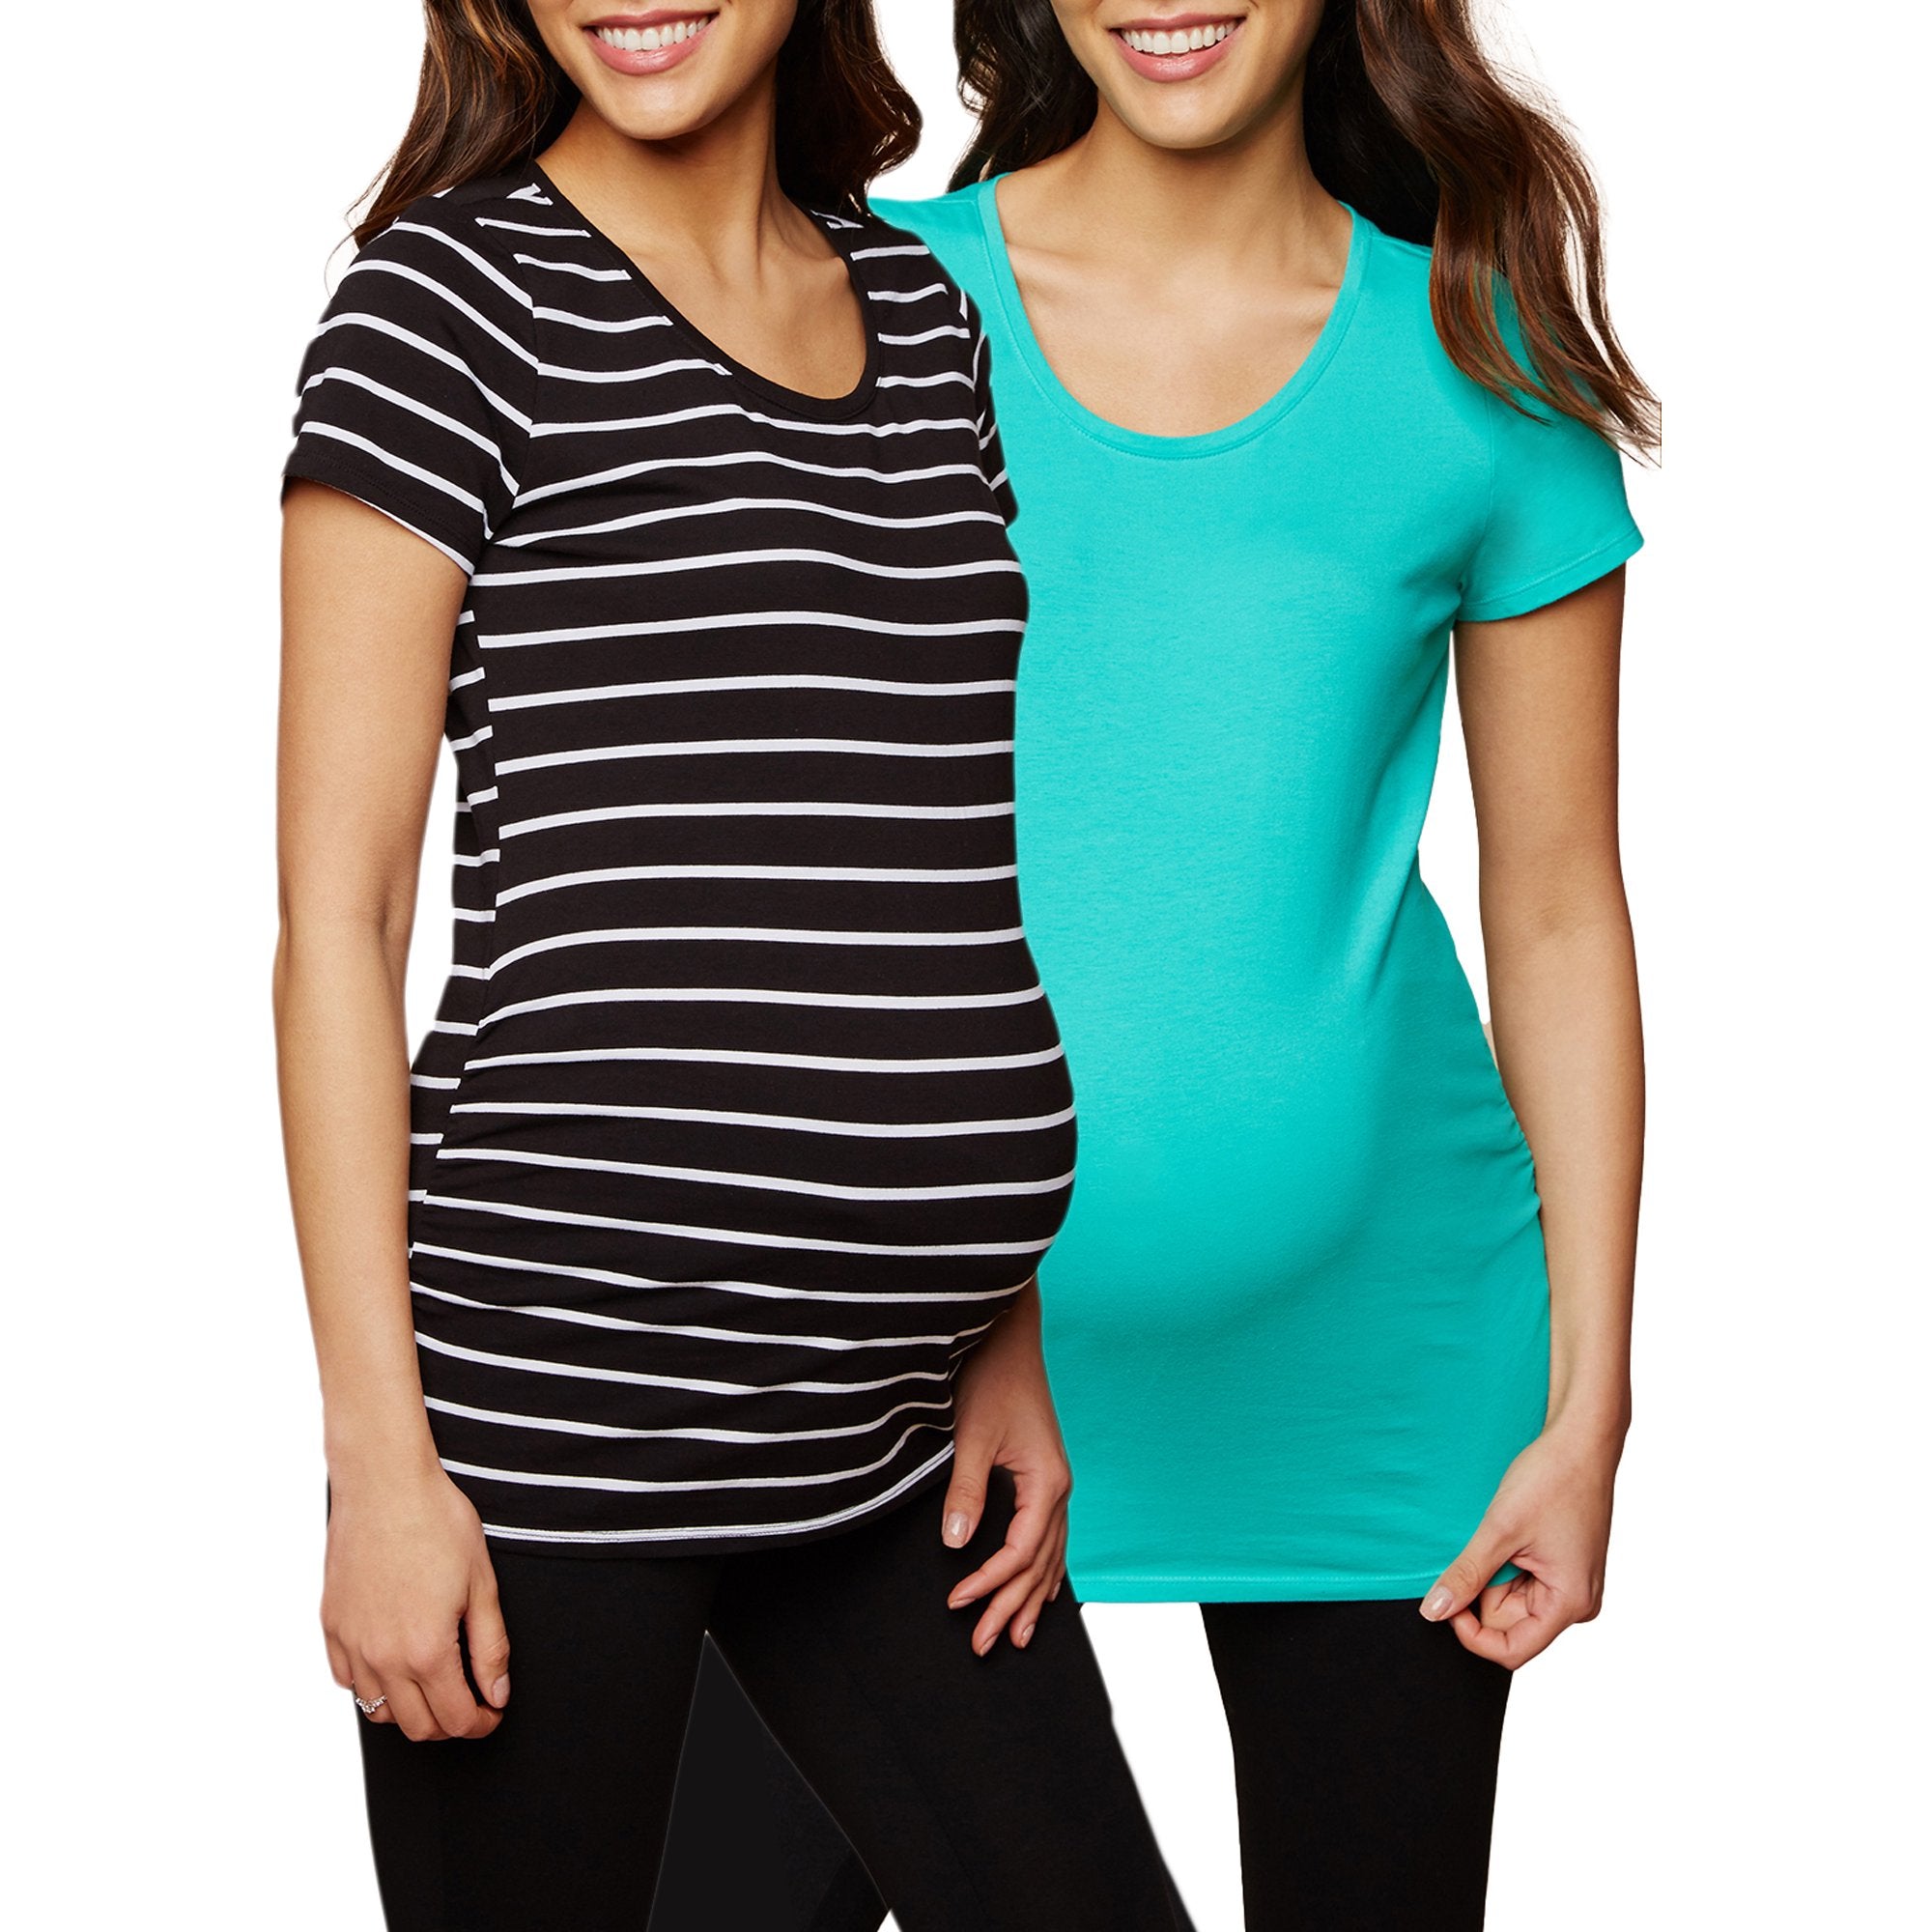 Maternity Scoop Neck Side Ruched T-shirts (2-pack)